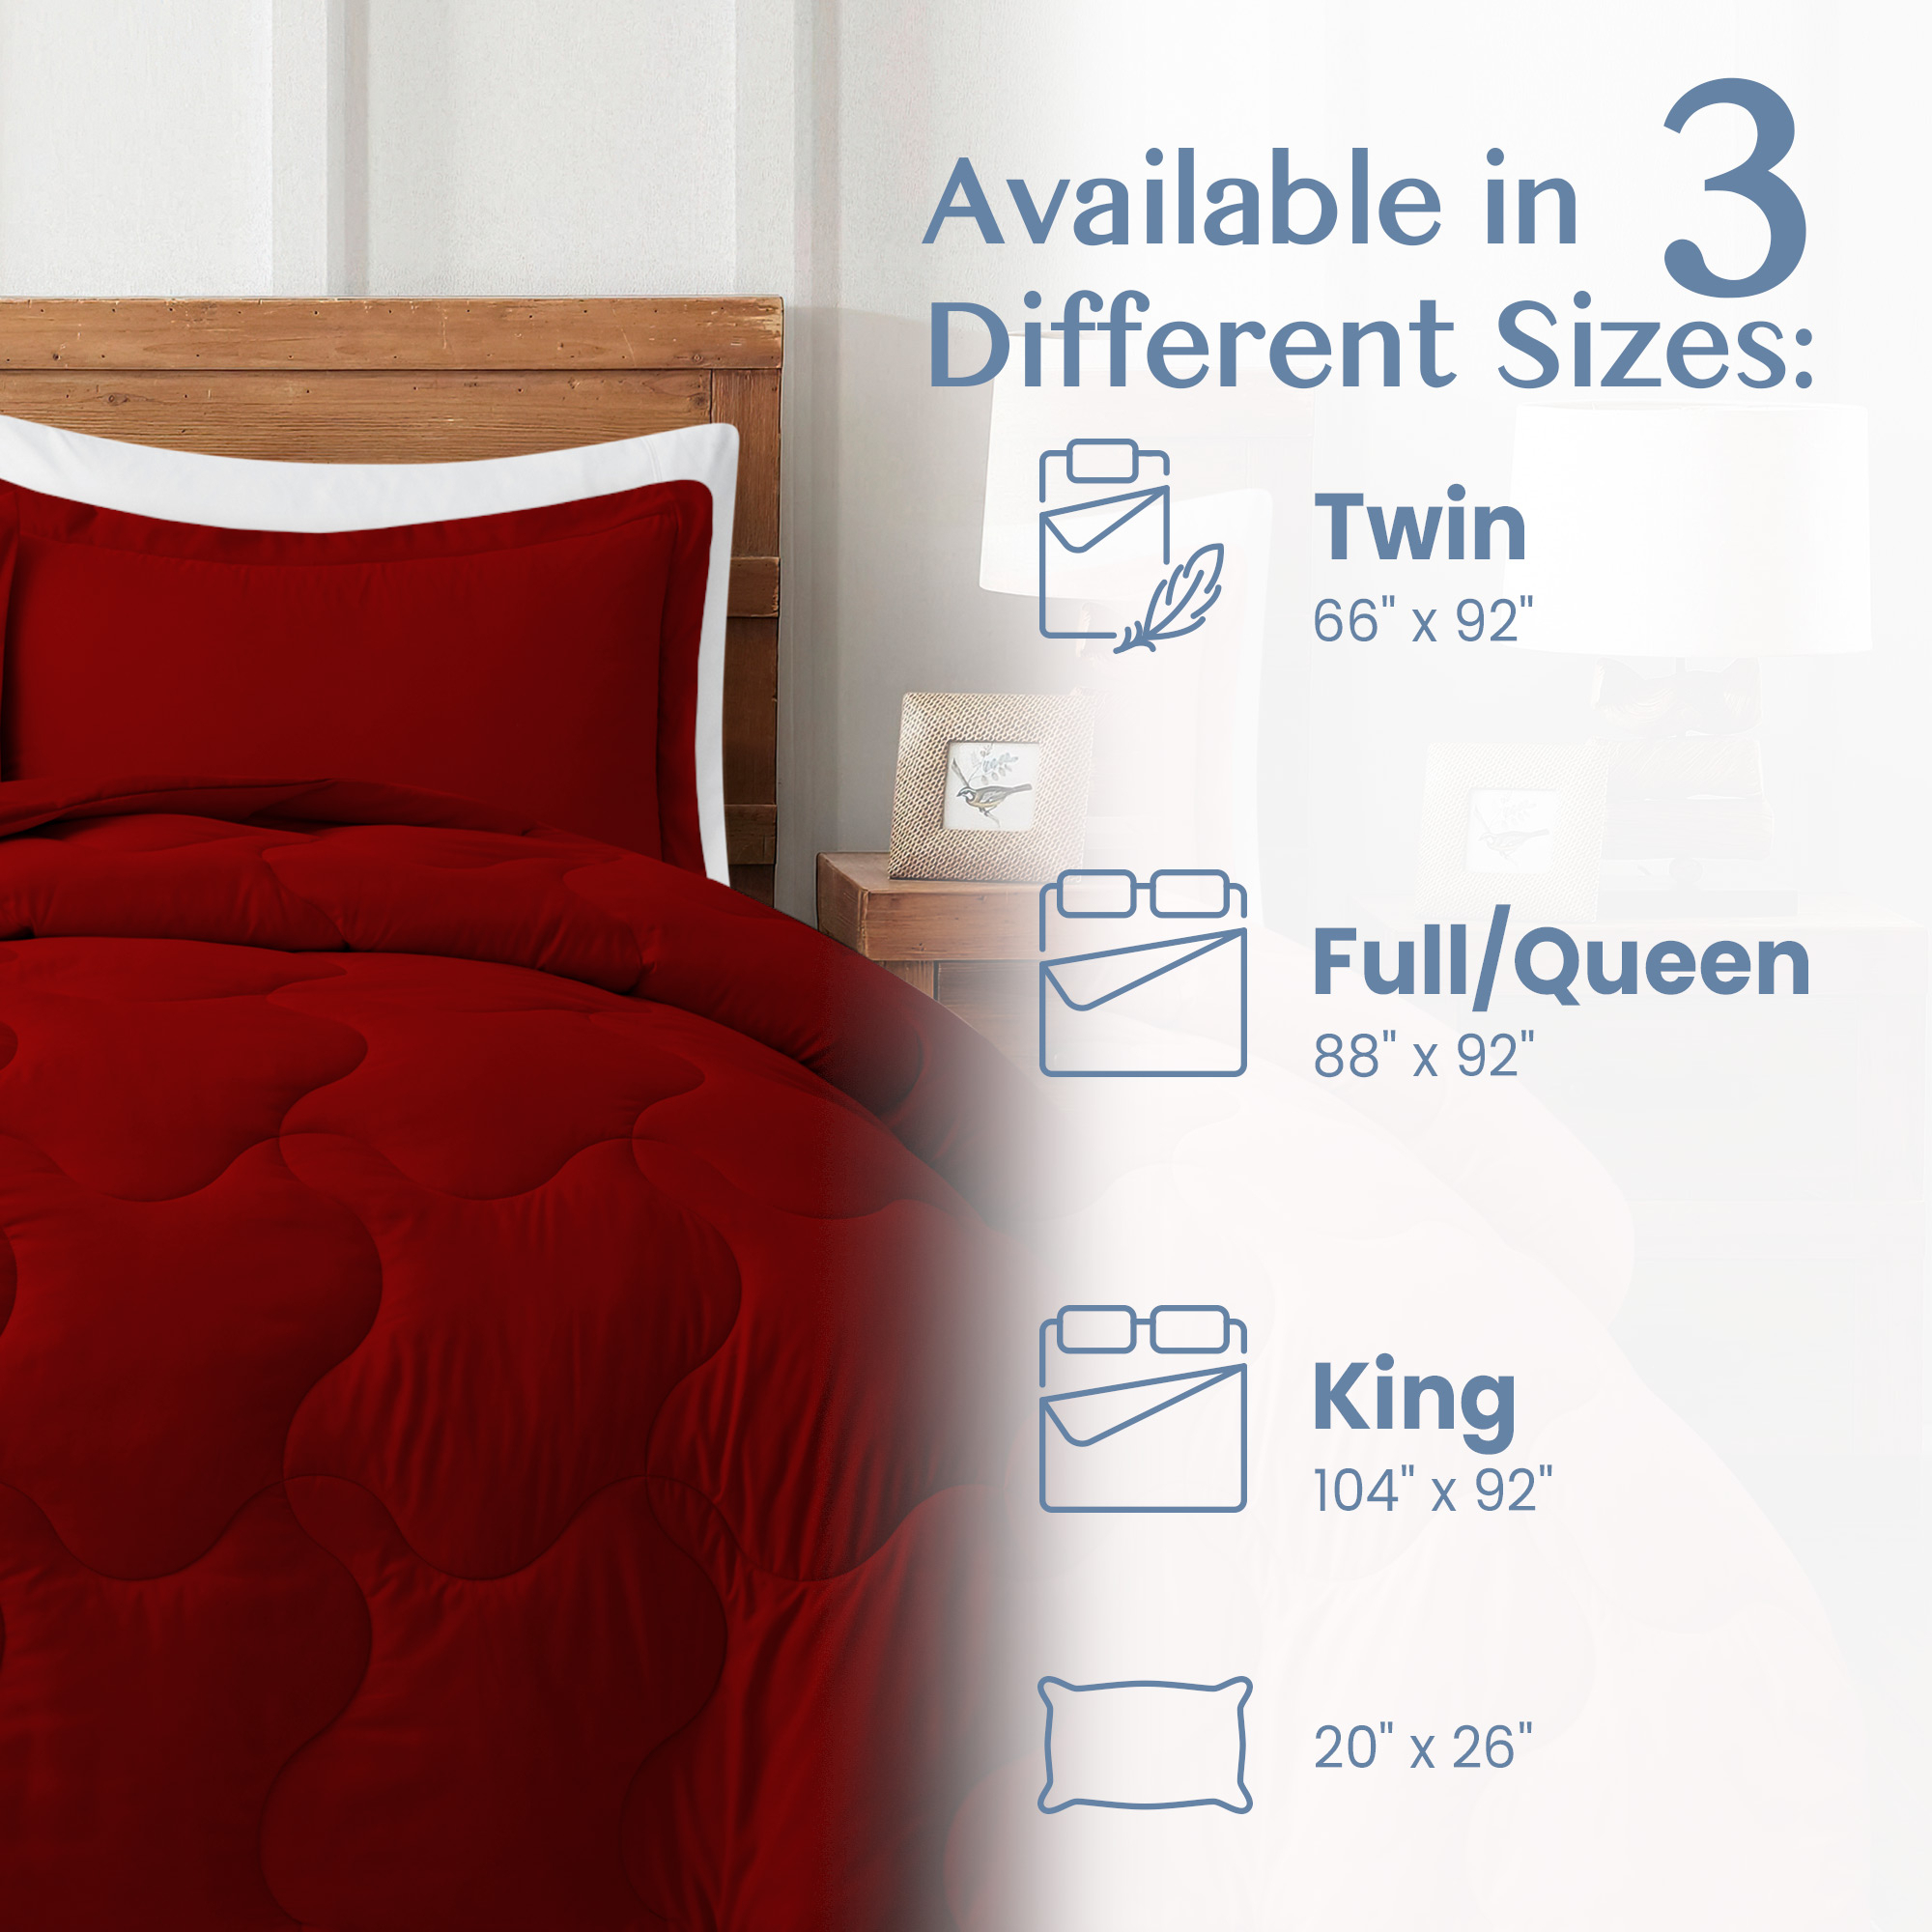 3 Or 2 Pieces Lightweight Reversible Comforter Set With Pillow Shams - Red/Black, King